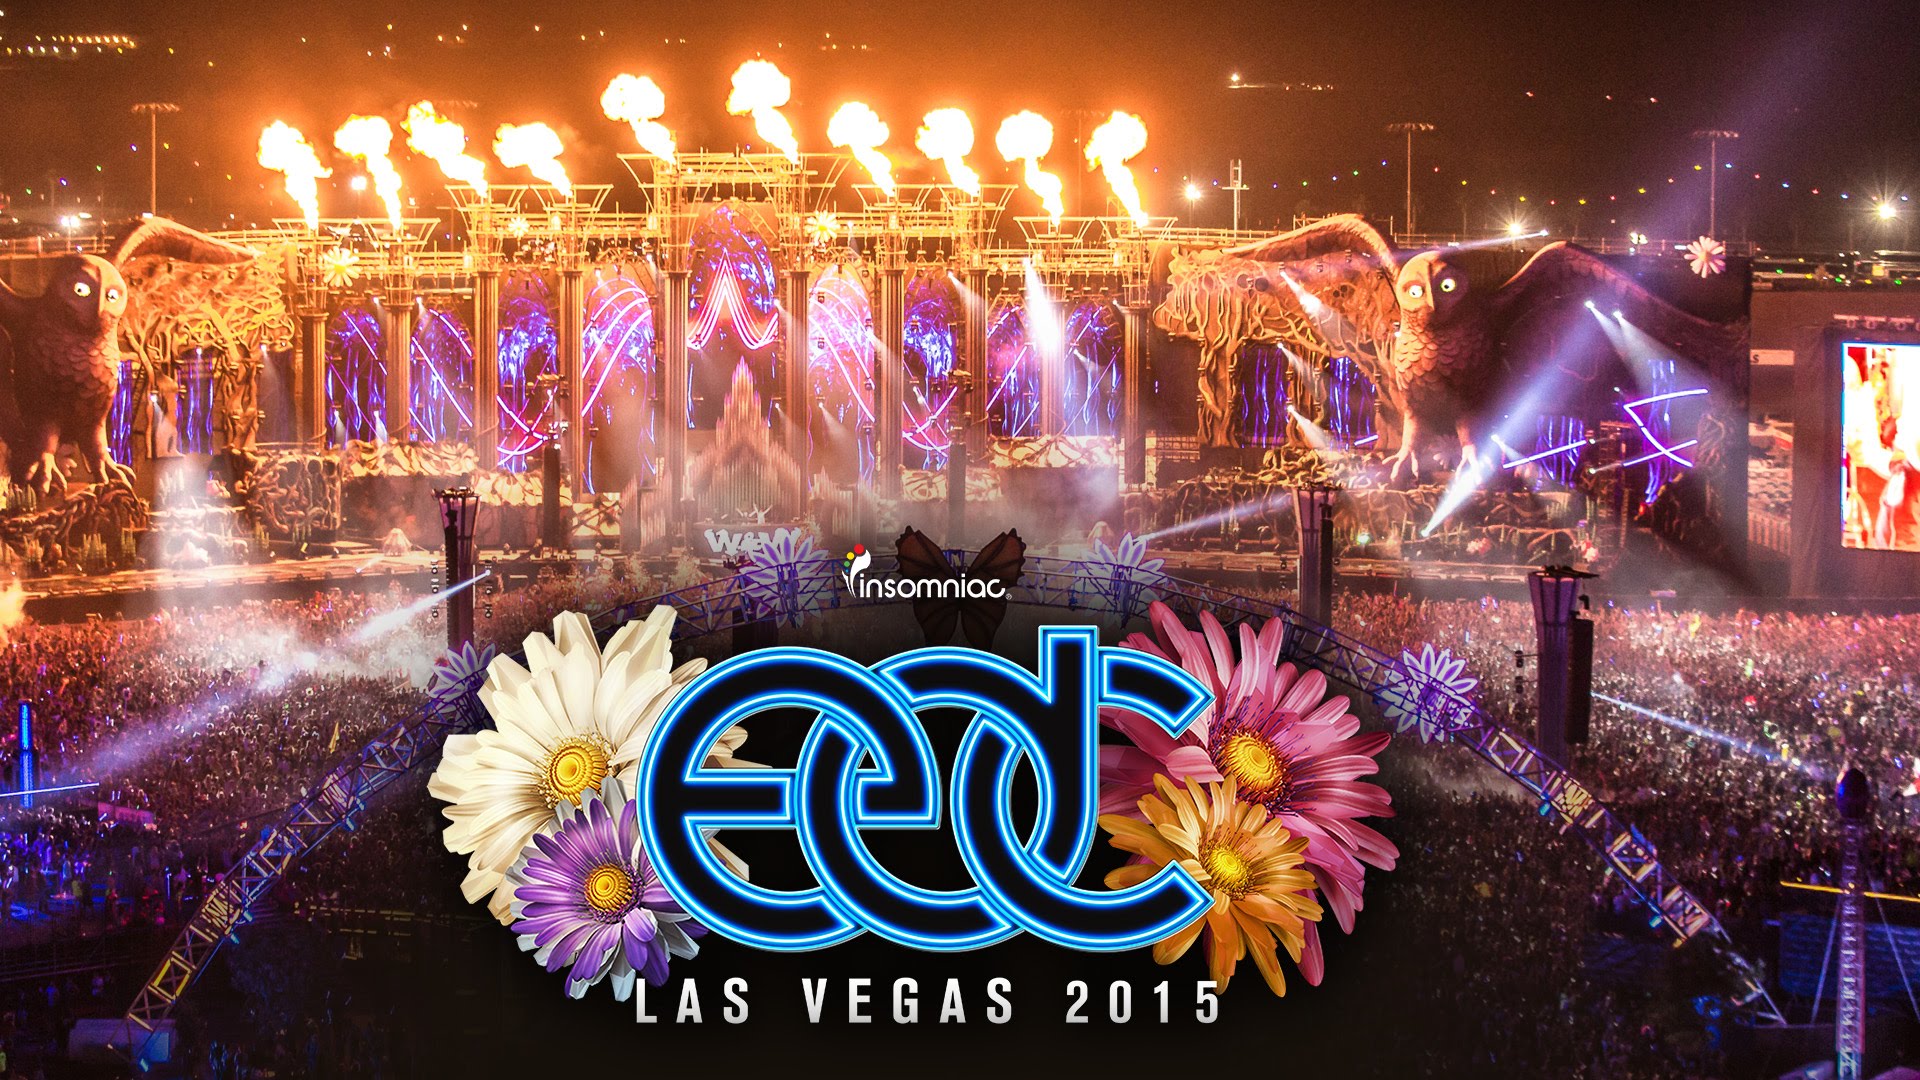 EDC Las Vegas International Speedway Love in the Fire performs fire dance on the nation's largest stage for the well known entertainment company Insomniac Electric Daisy Carnival 